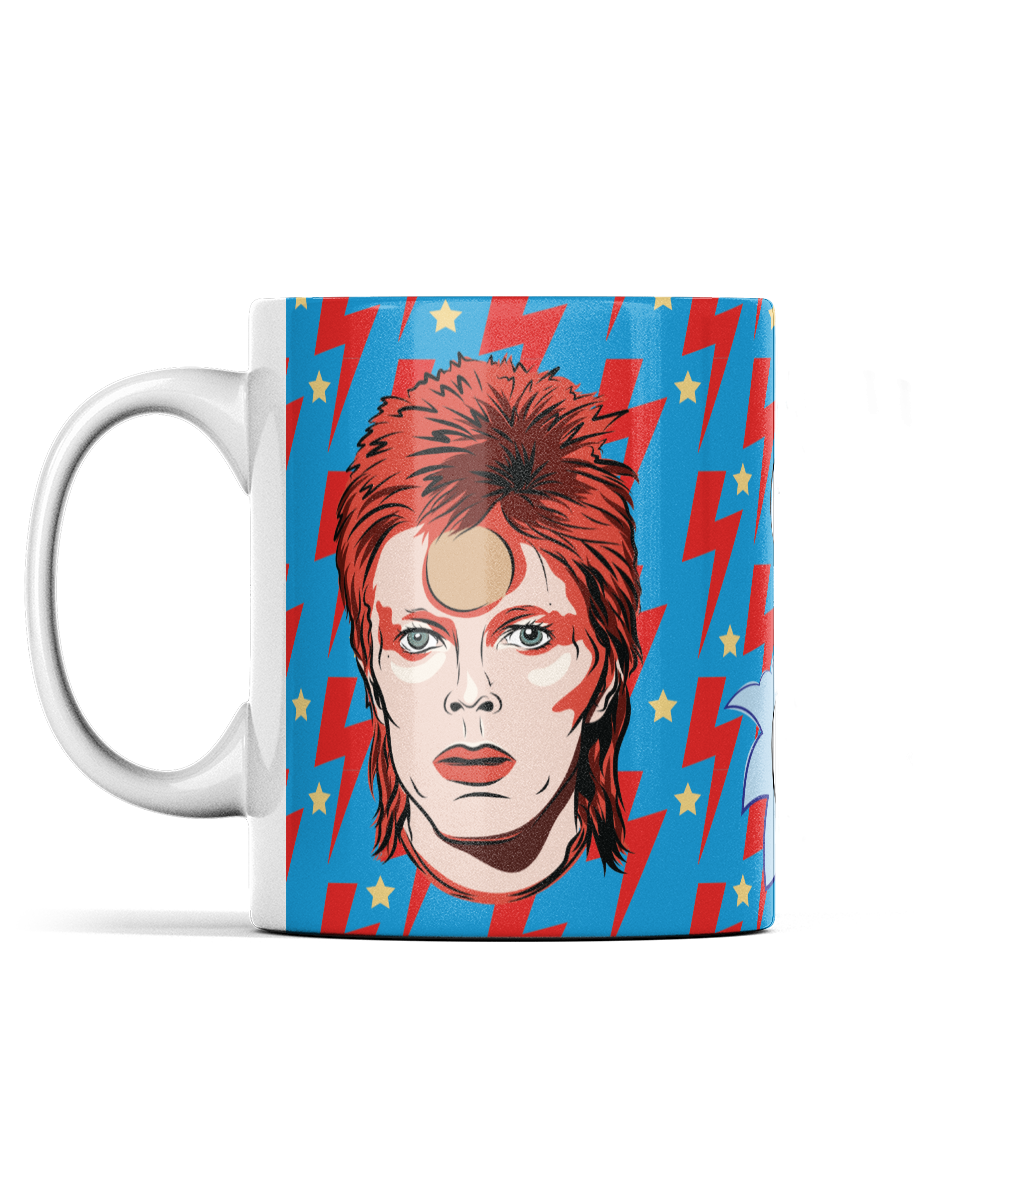 Faces of Bowie mug